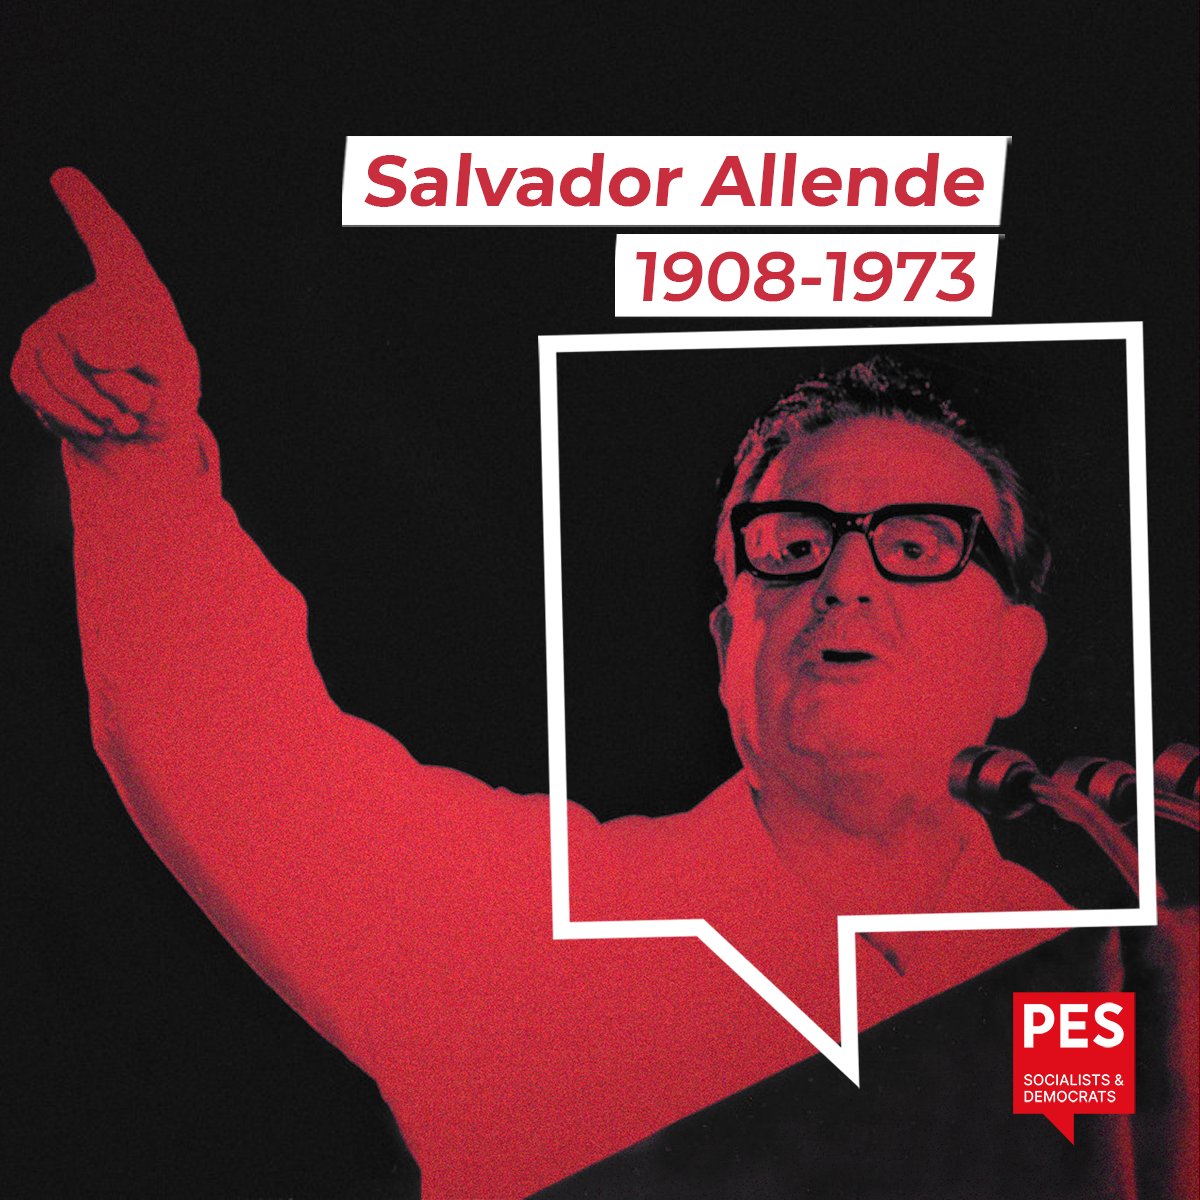 , Gauche France: On the anniversary of his death, we honour #Salvad… #nupes #gauche @PES_PSE